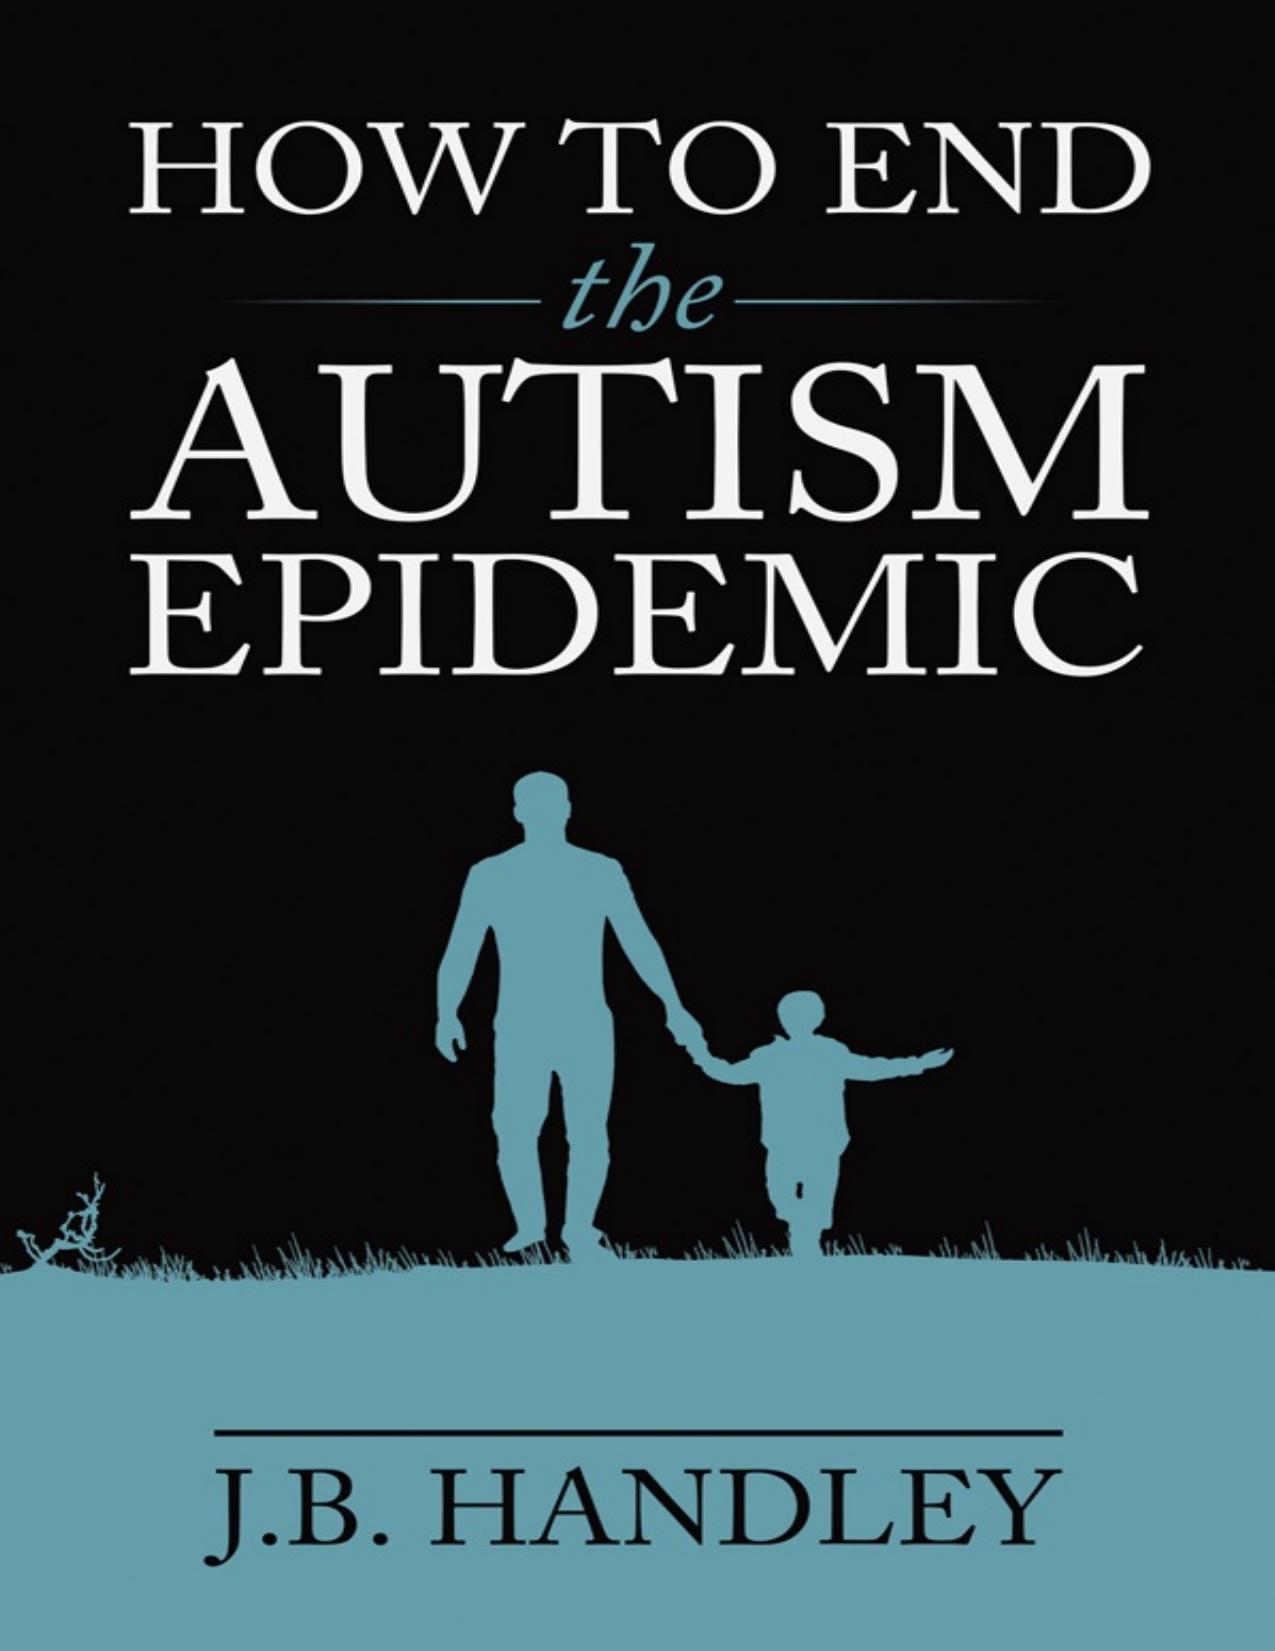 How to End the Autism Epidemic by J.B. Handley